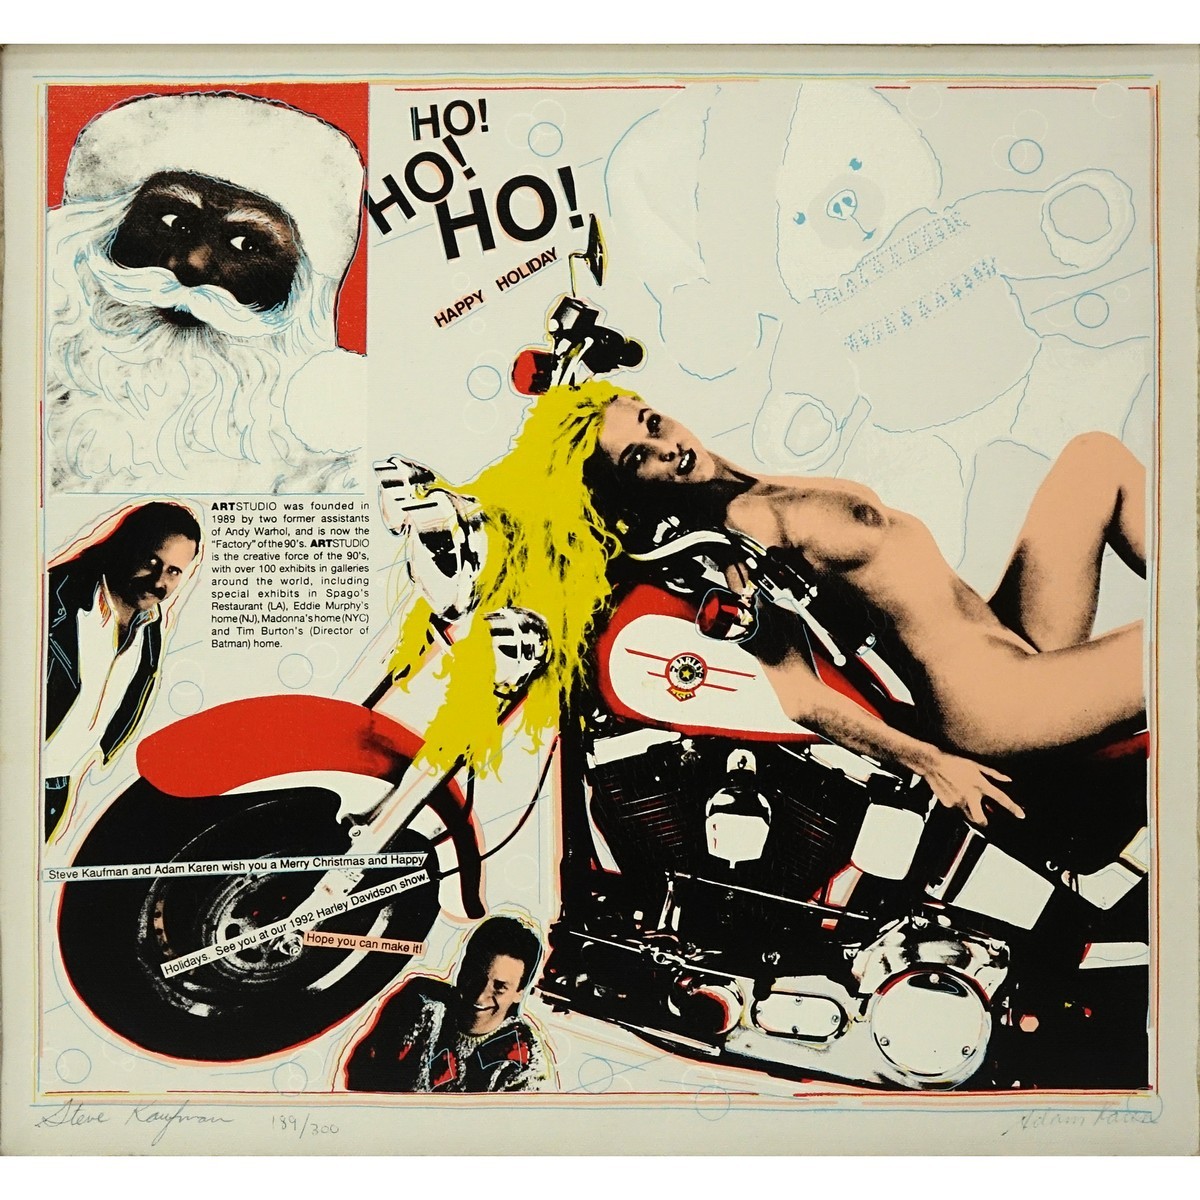 Steve Kaufman and Adam Karen, American (20th C) Print on Canvas, Ho Ho Ho, Signed and Numbered 189/300 in Ink on Lower Margin. Copy of the Art Studio New York documents included.